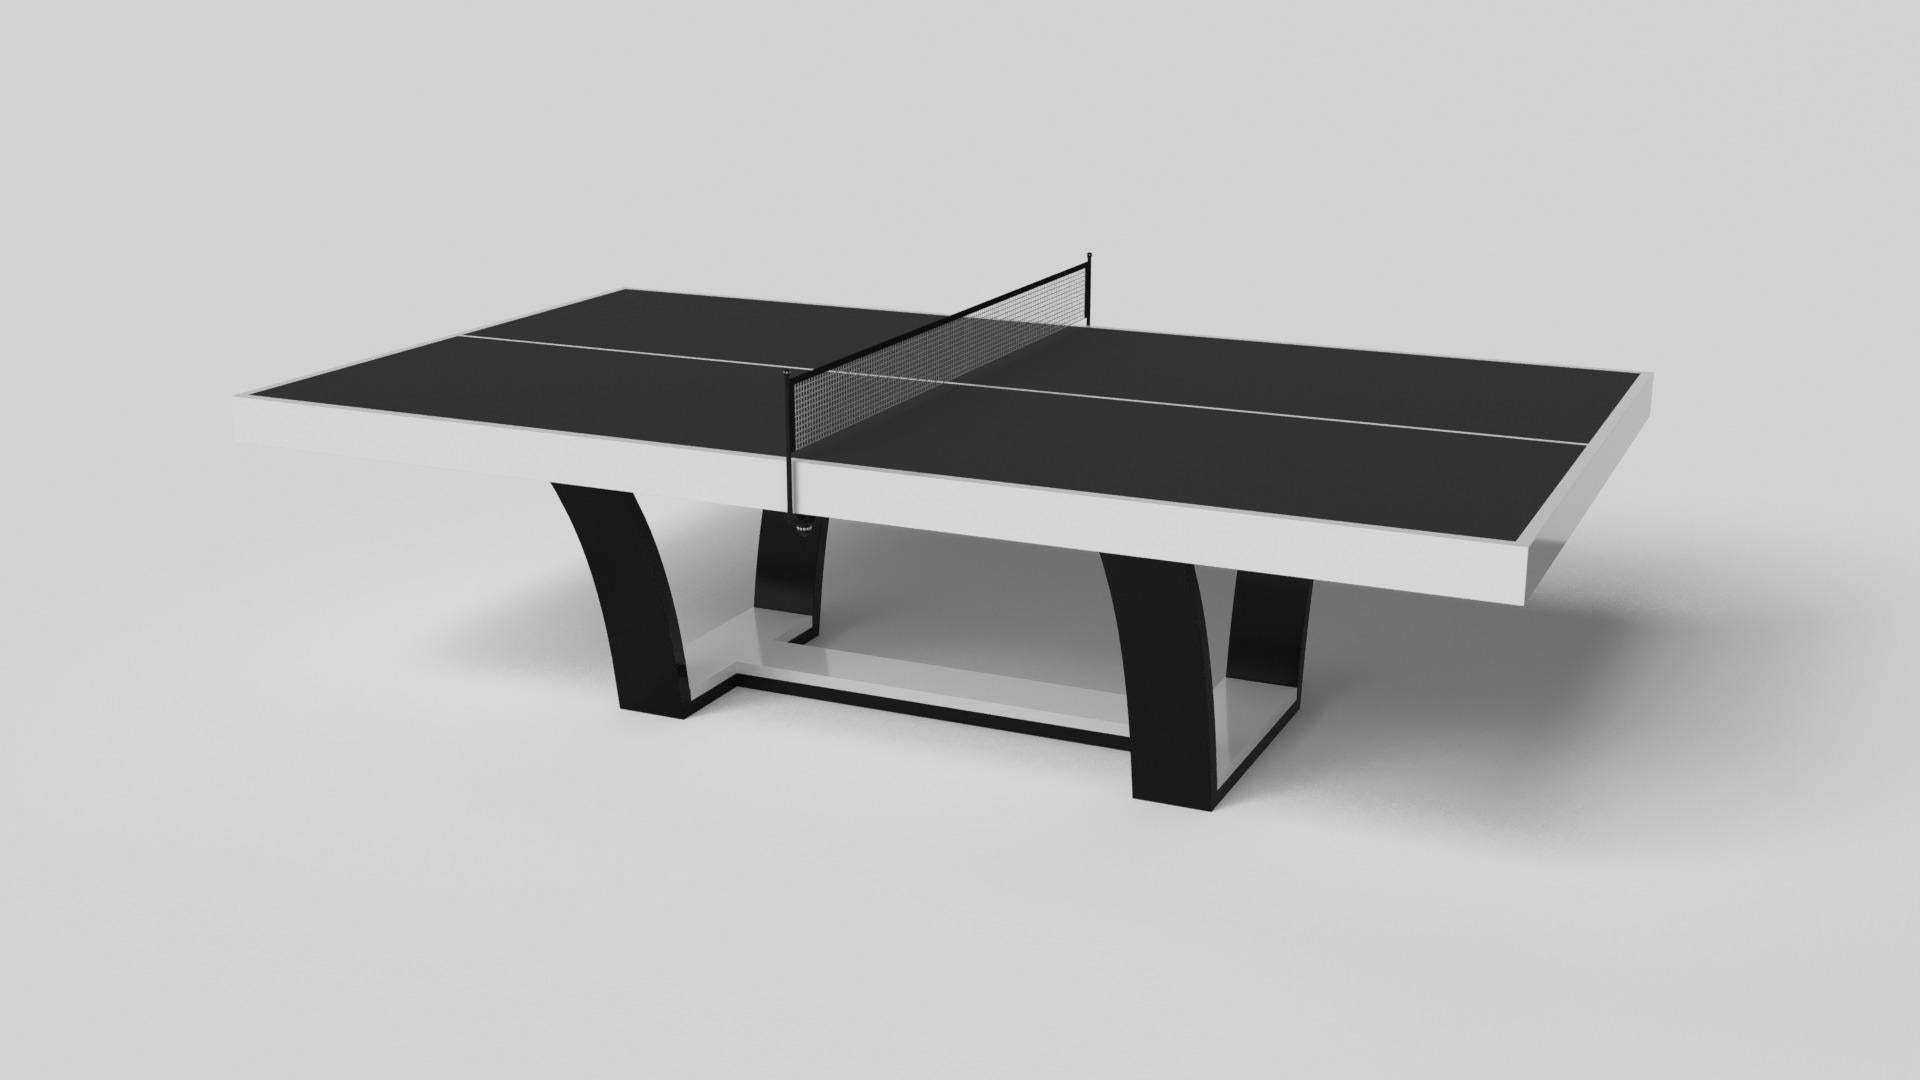 With an I-shaped metal base, slightly sloped metal legs, and a contrasting wood top, the Elite table tennis table exudes modern sophistication while evoking a sense of art deco design. This table is a confluence of style, made to meet today's